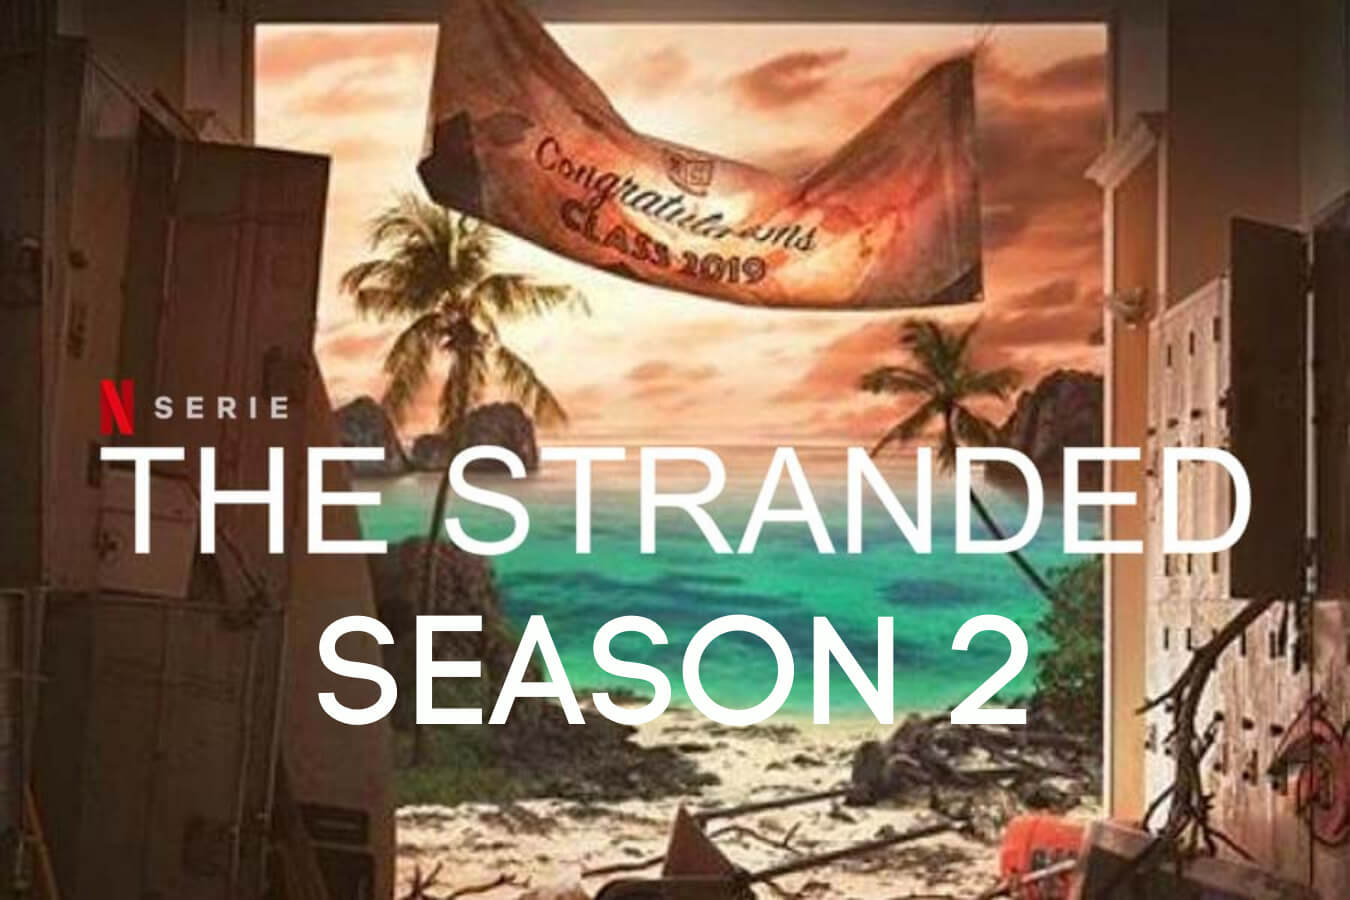 When was the original release date of The Stranded?